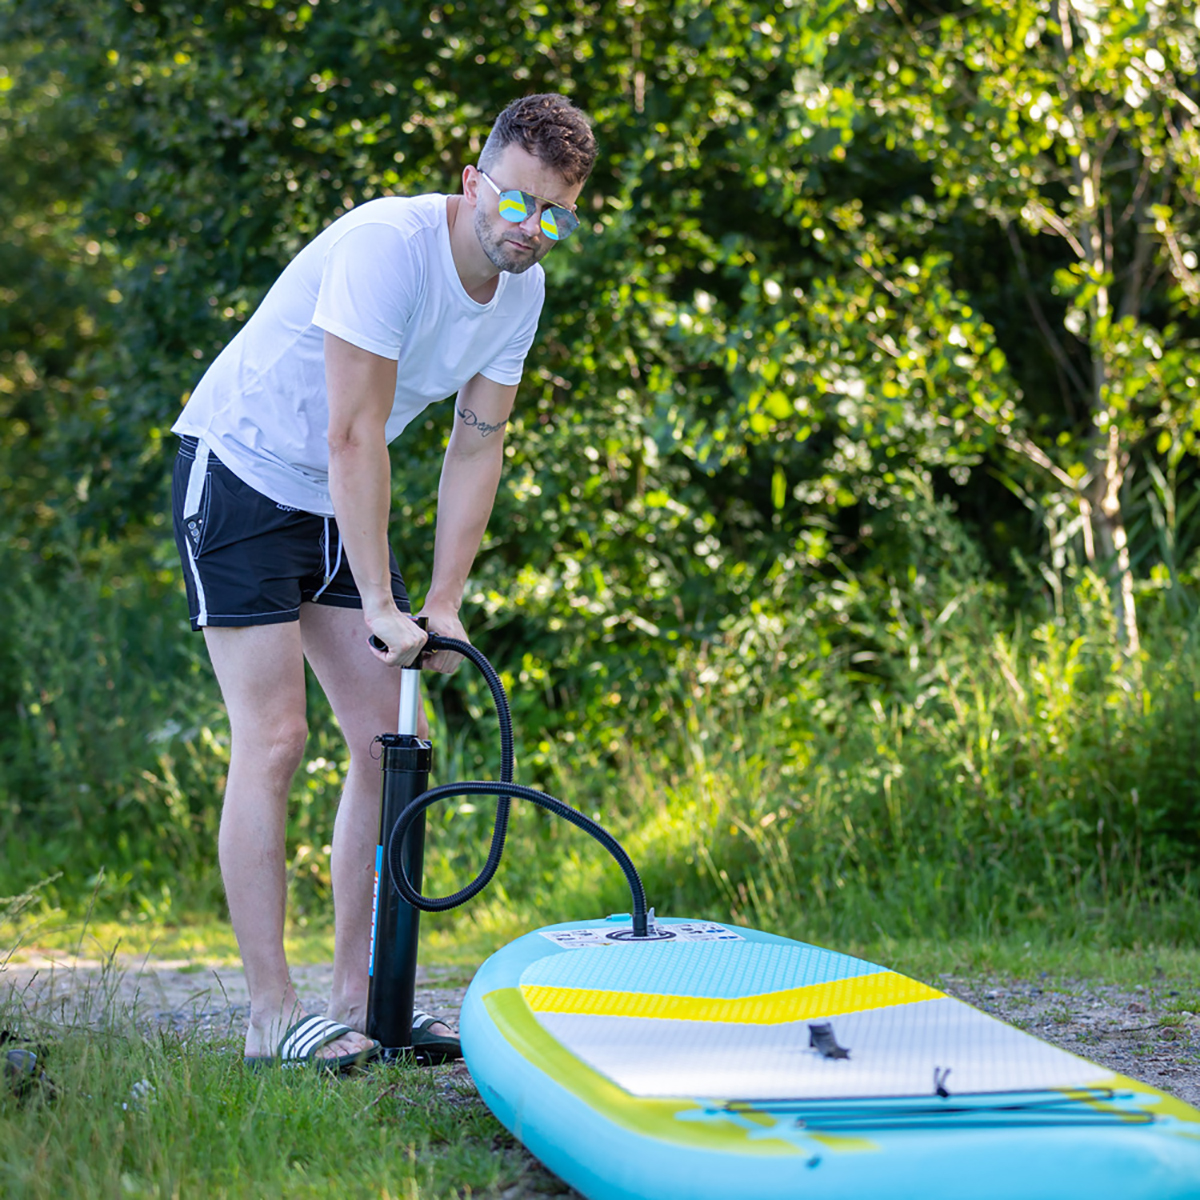 Blau Paddle Board, BLUMILL Up Outdoor Stand